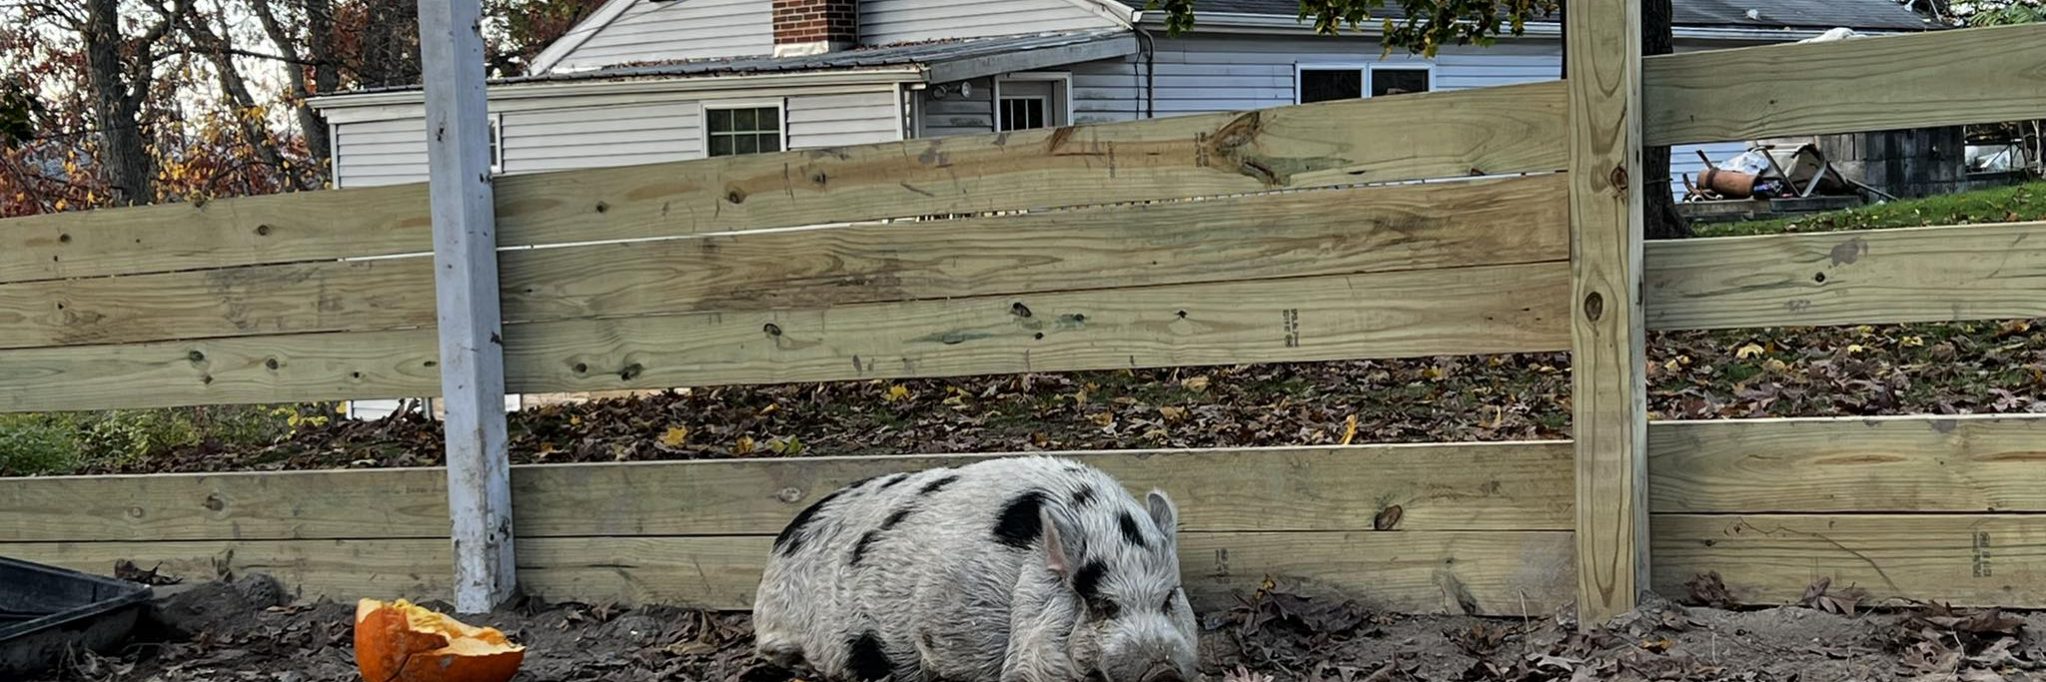 Pet pig Kevin Bacon in his new pen